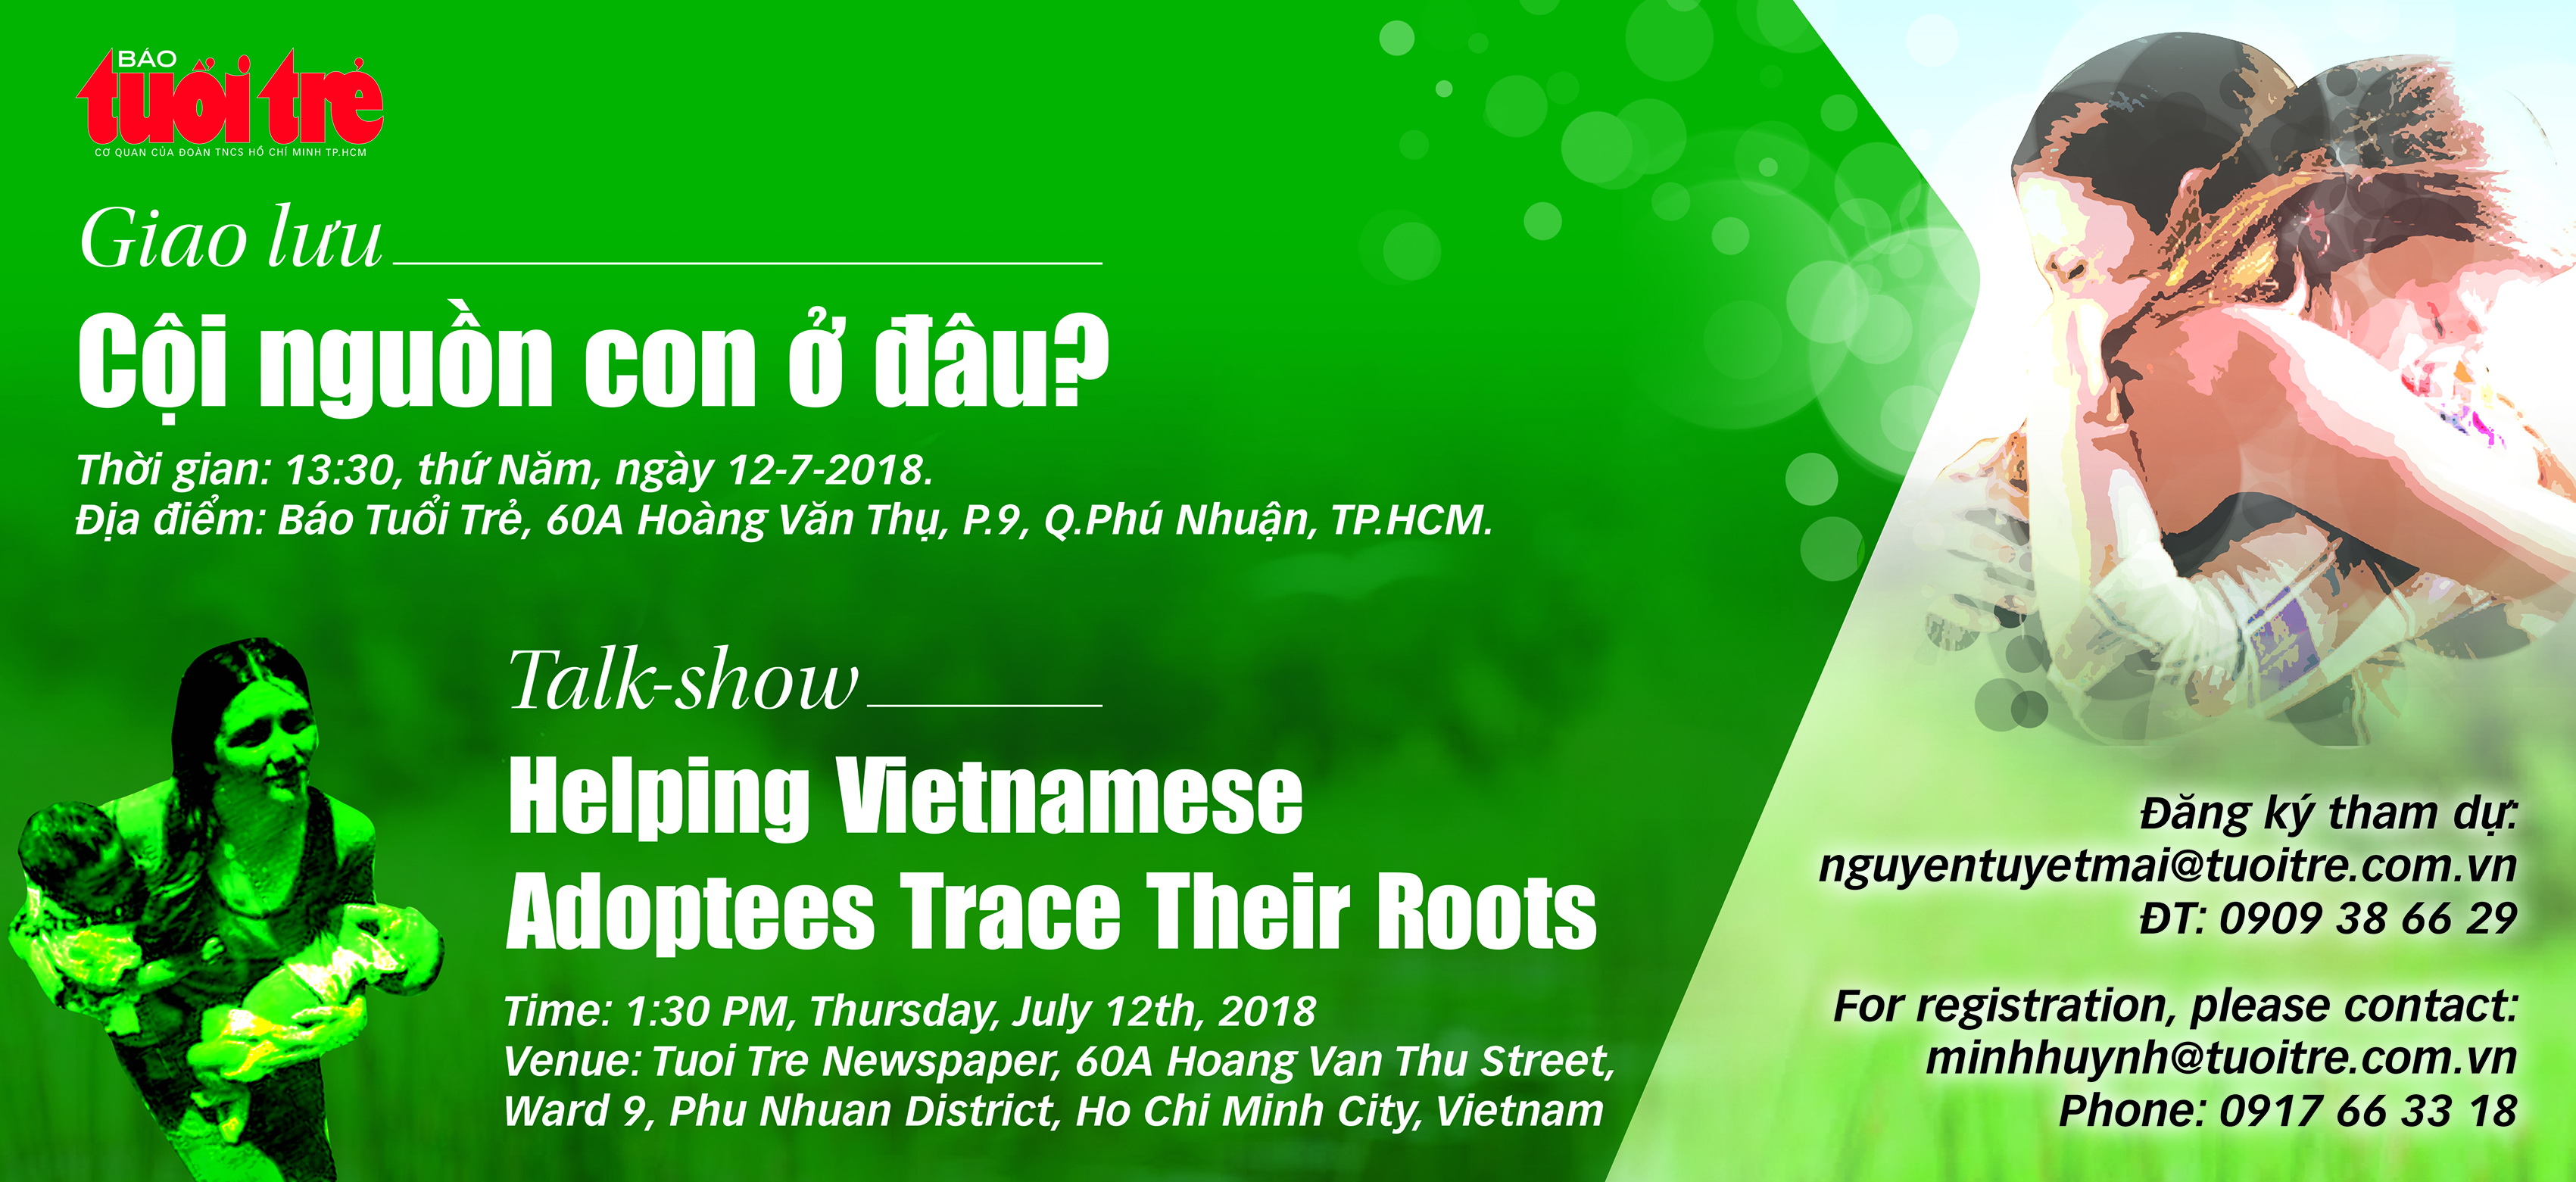 Tuoi Tre launches program to help Vietnamese adoptees trace roots